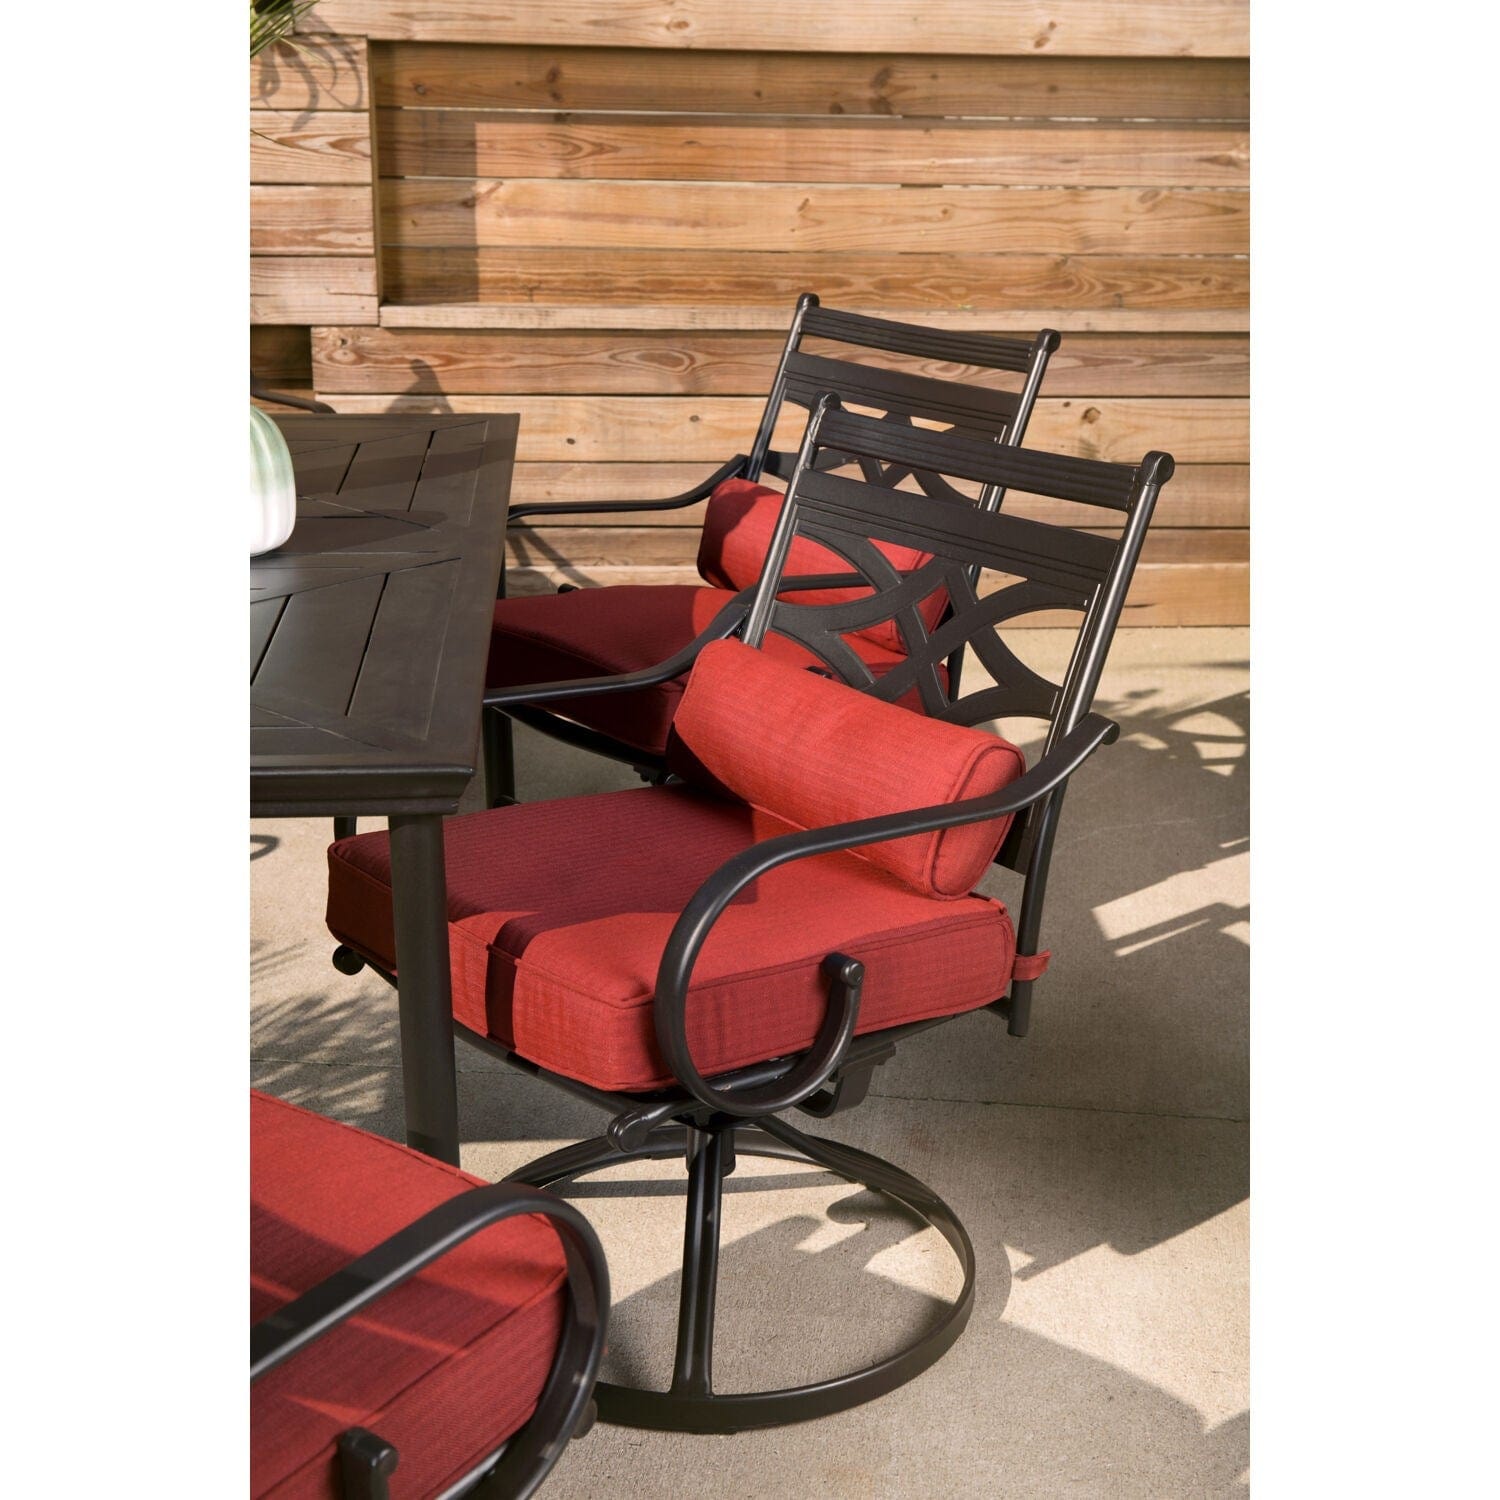 Hanover Outdoor Dining Set Hanover - Montclair 7-Piece Dining Set in Chili Red with 6 Swivel Rockers and a 40" x 67" Dining Table | MCLRDN7PCSQSW6-CHL